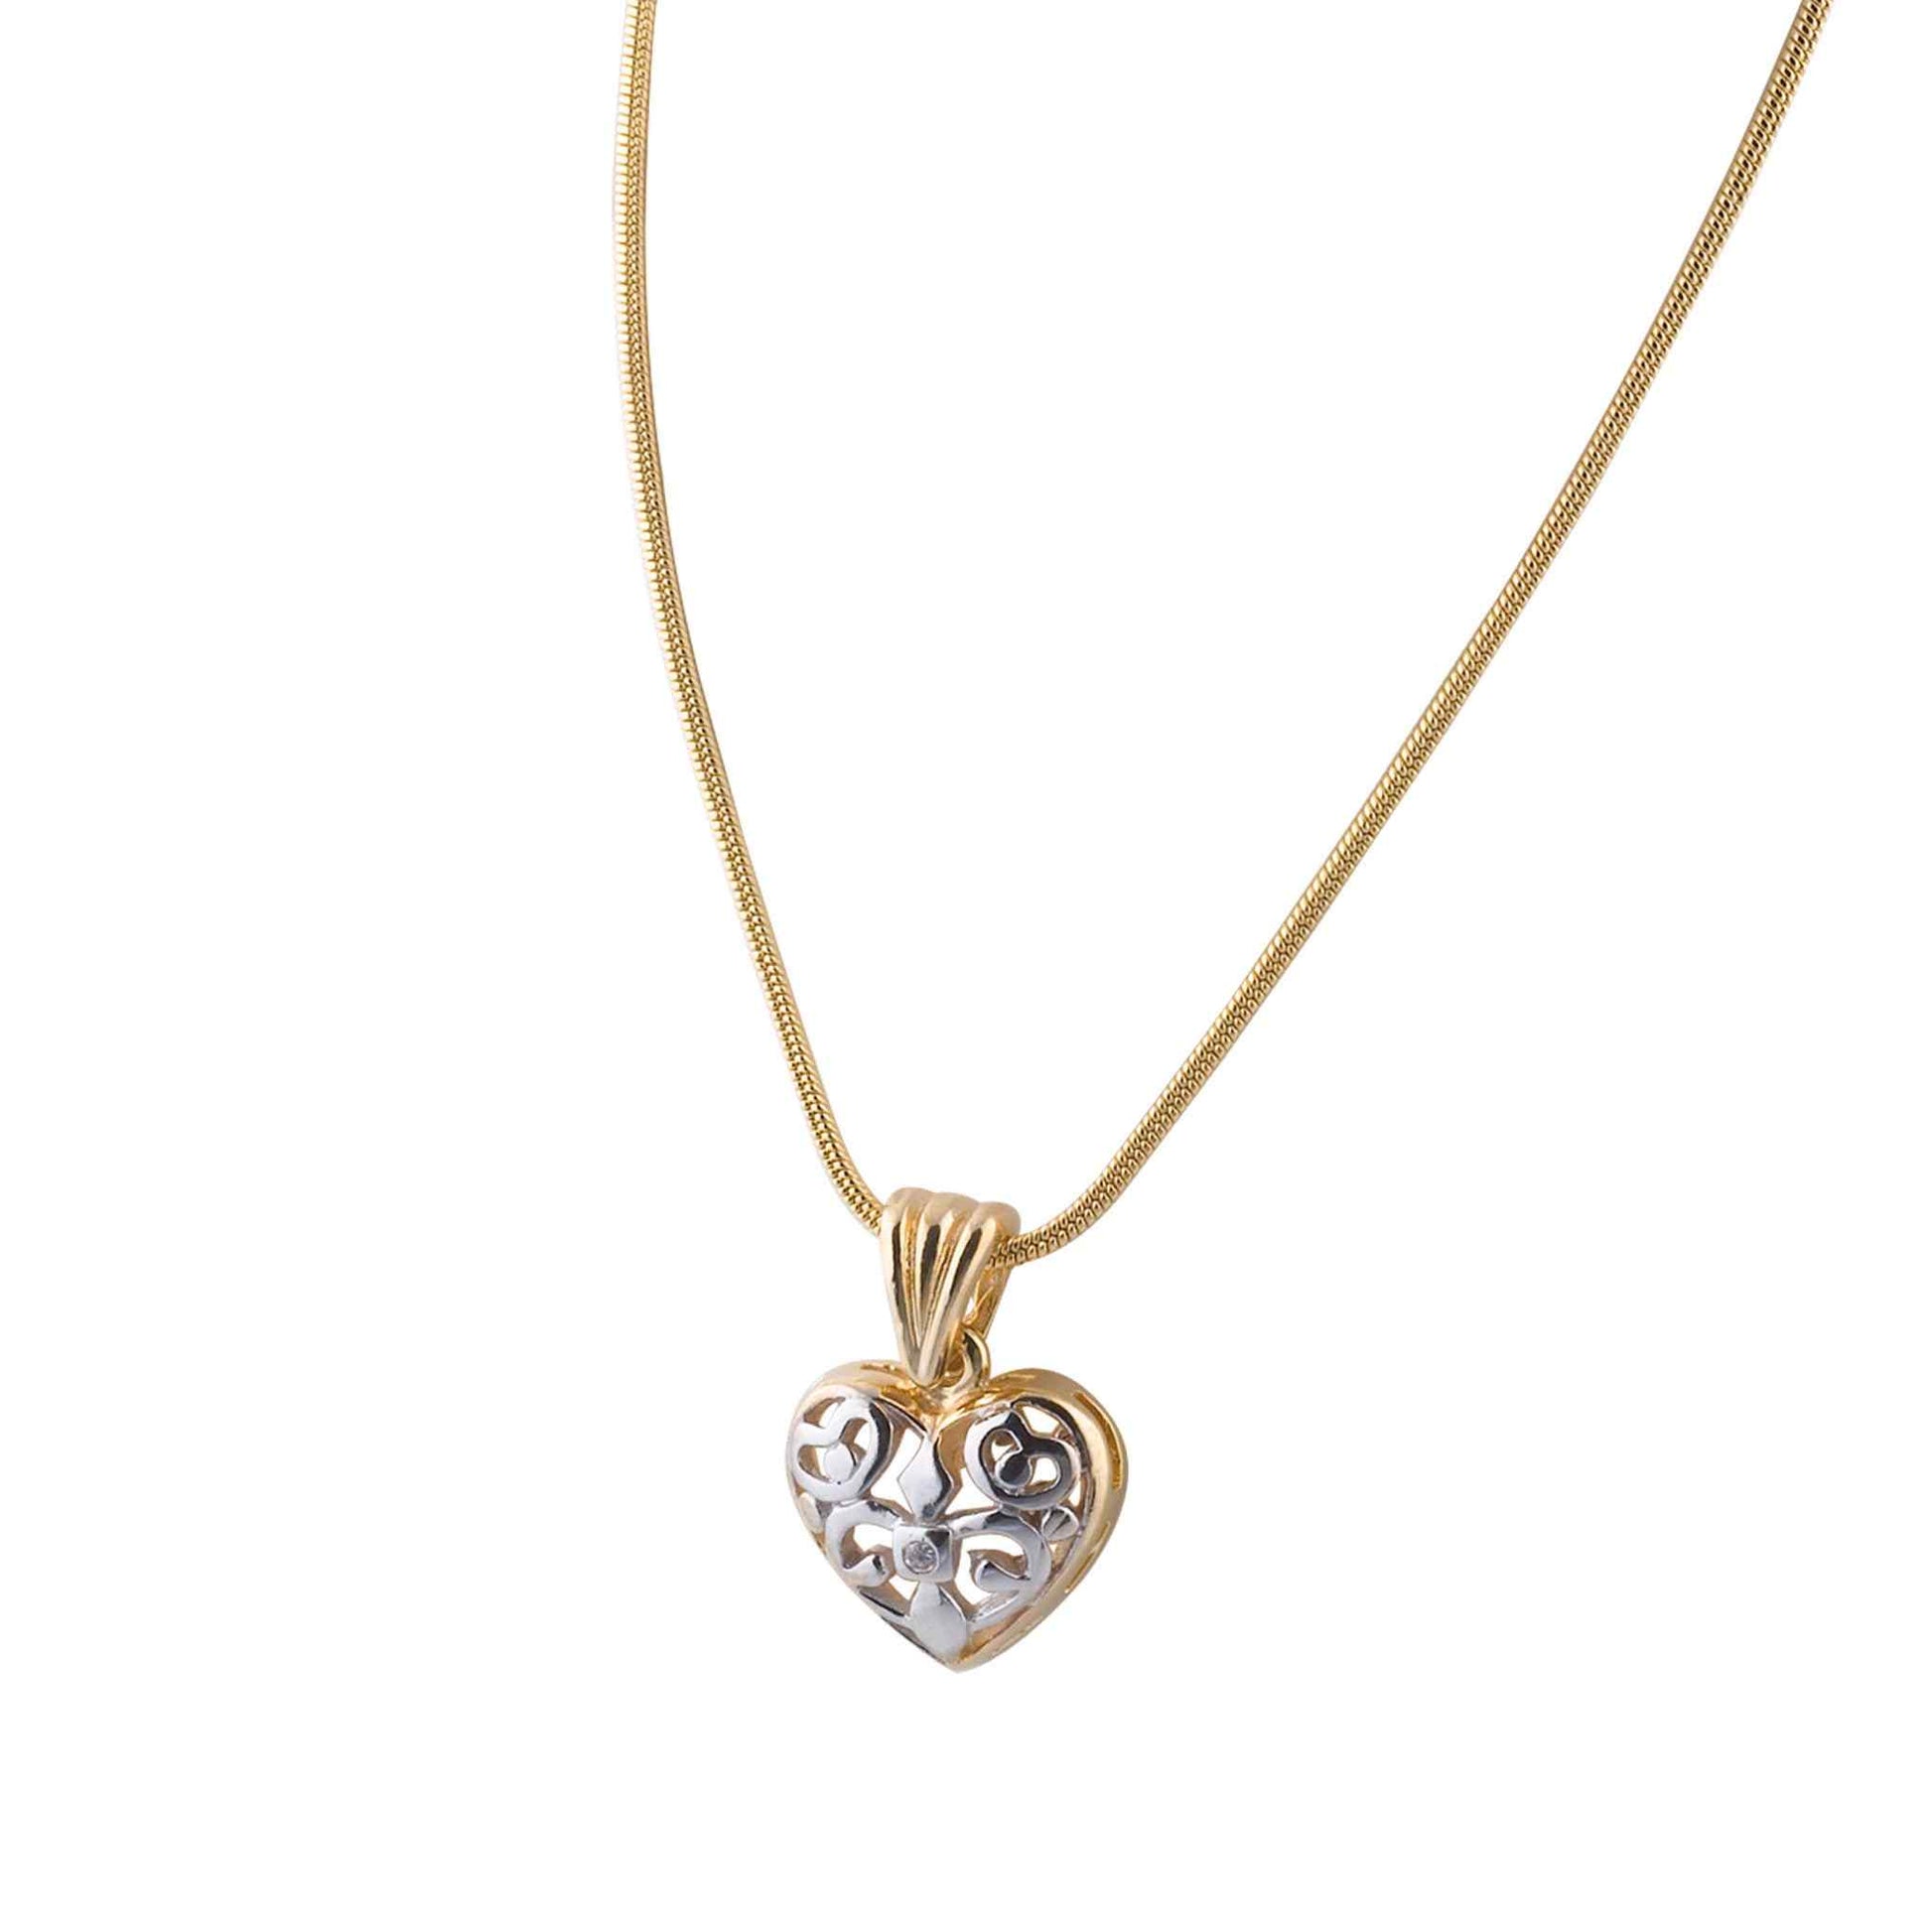 A two tone gold & rhodium filigree heart pendant displayed on a neutral white background.